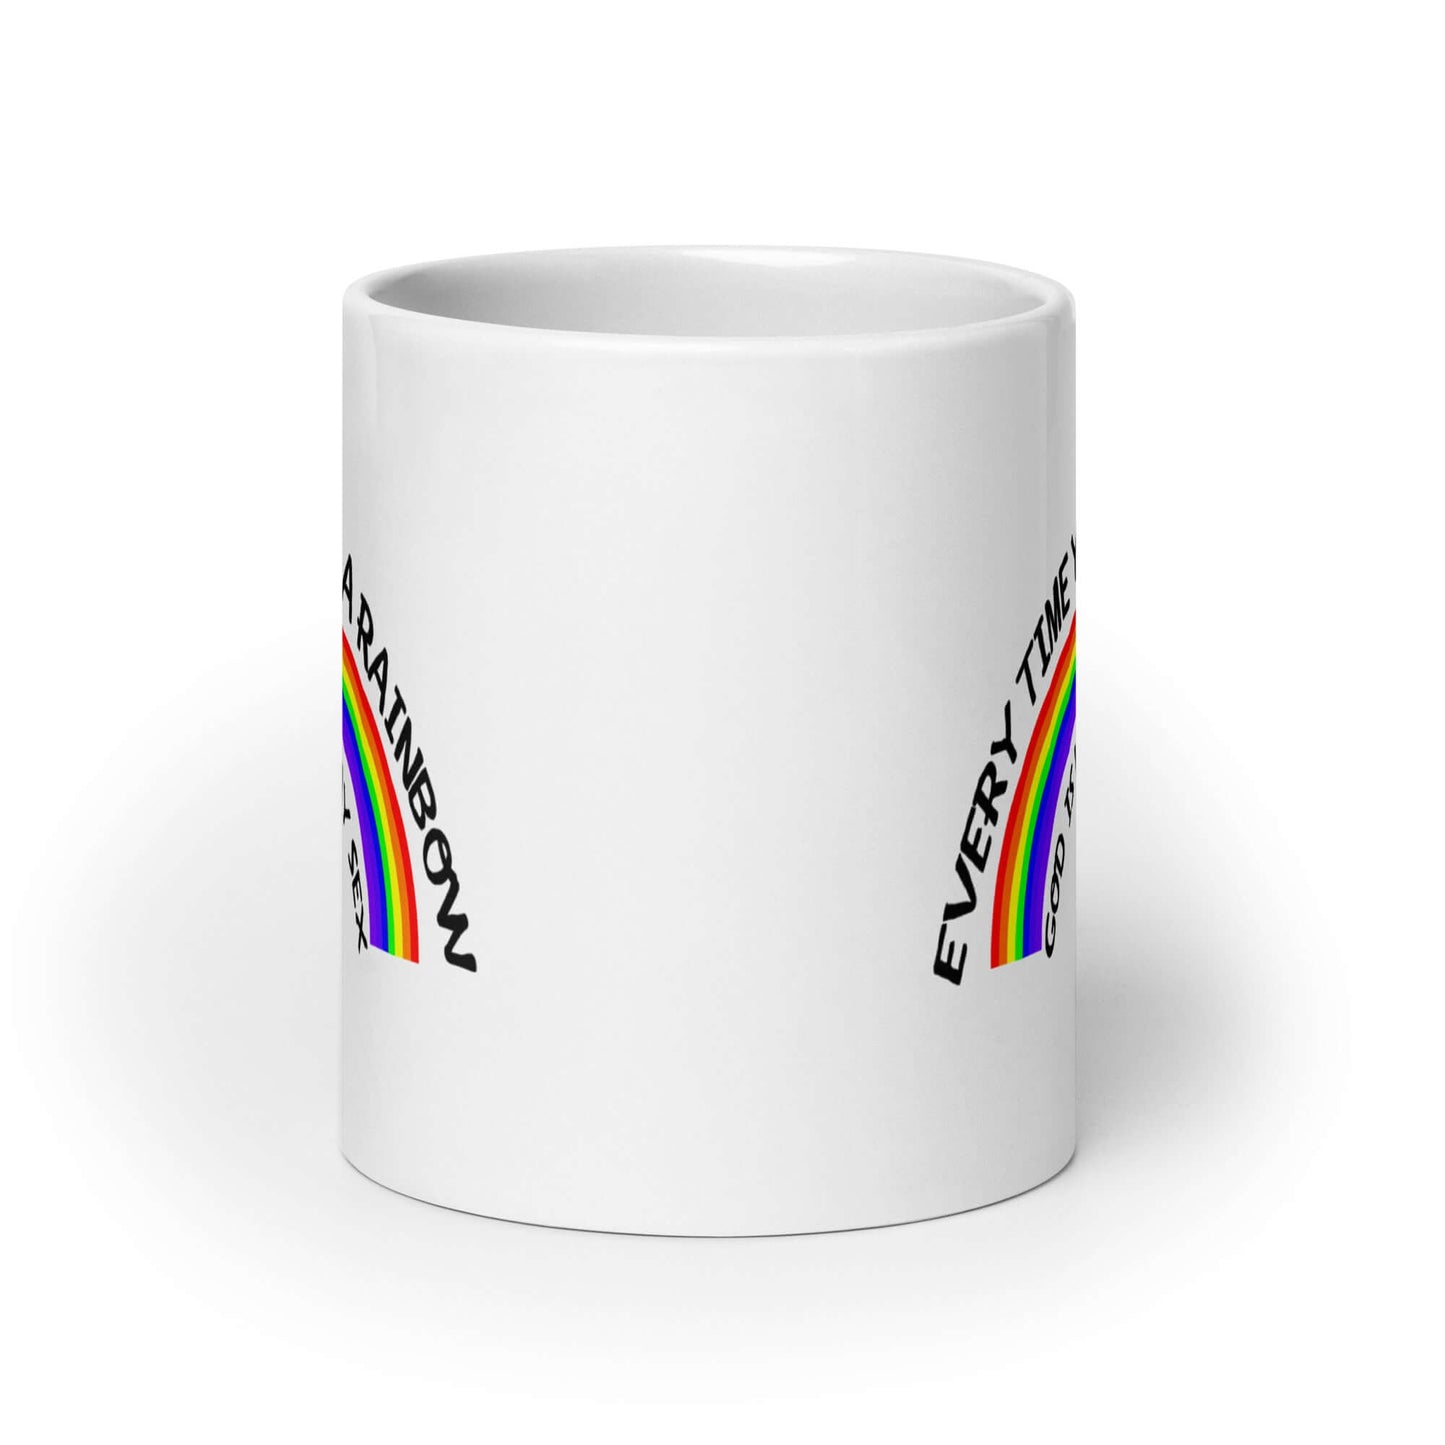 Every time you see a rainbow God is having gay sex funny and completely inappropriate coffee mug